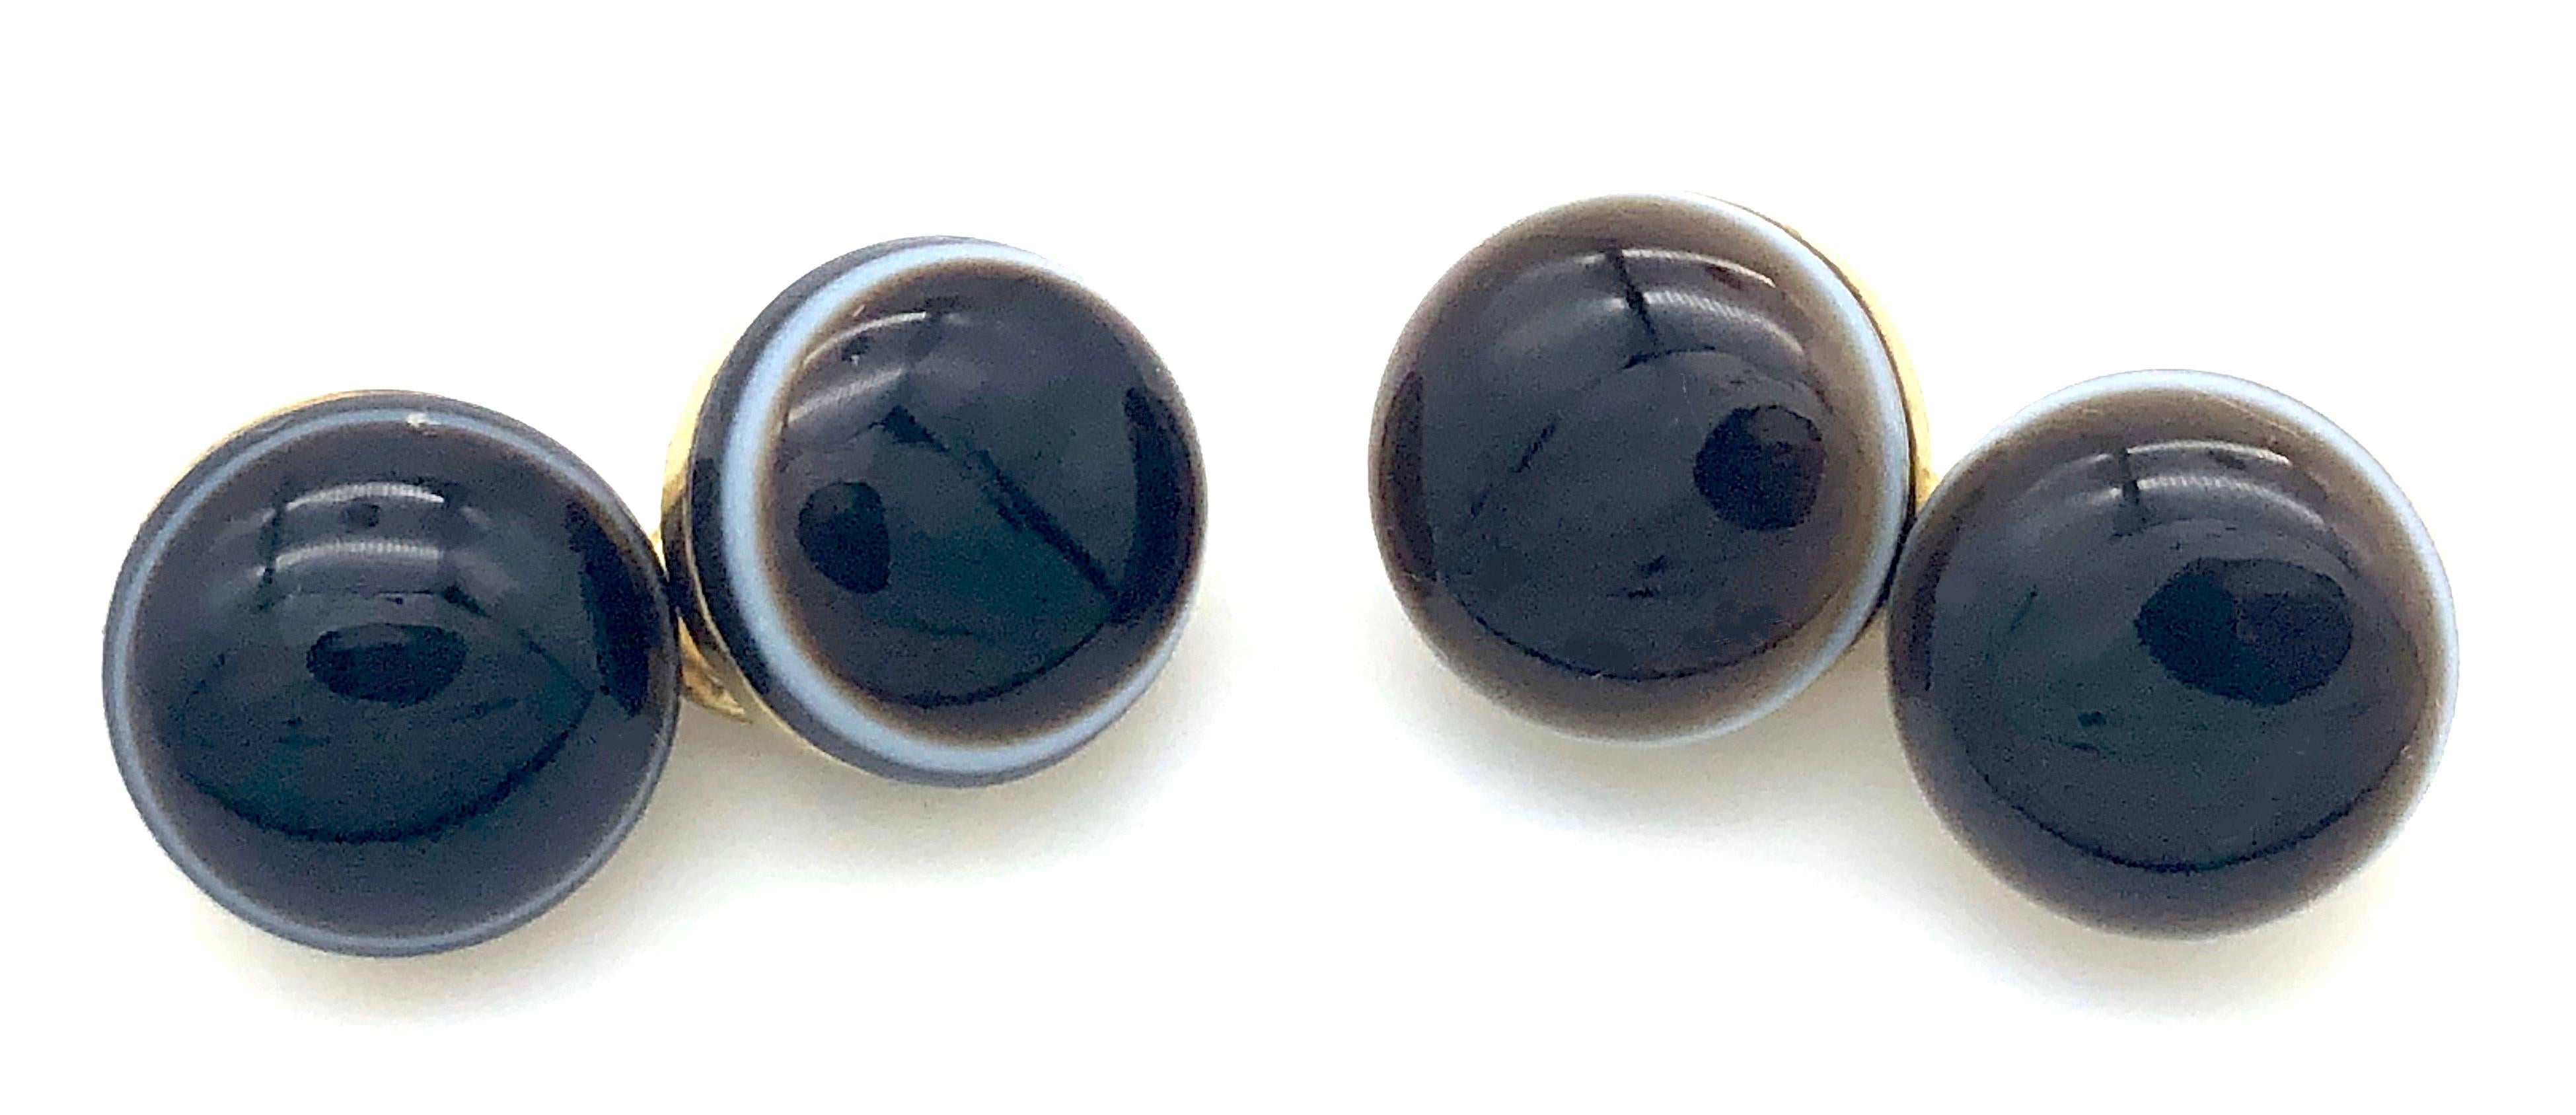 These cufflinks have sardonyx cabochons cut to resemble eyes.
This semi precious stone in the cut reminiscent of an eye has been in use since ancient times.  The eye was credited with protective qualities has been been worn as a talisman. IT became